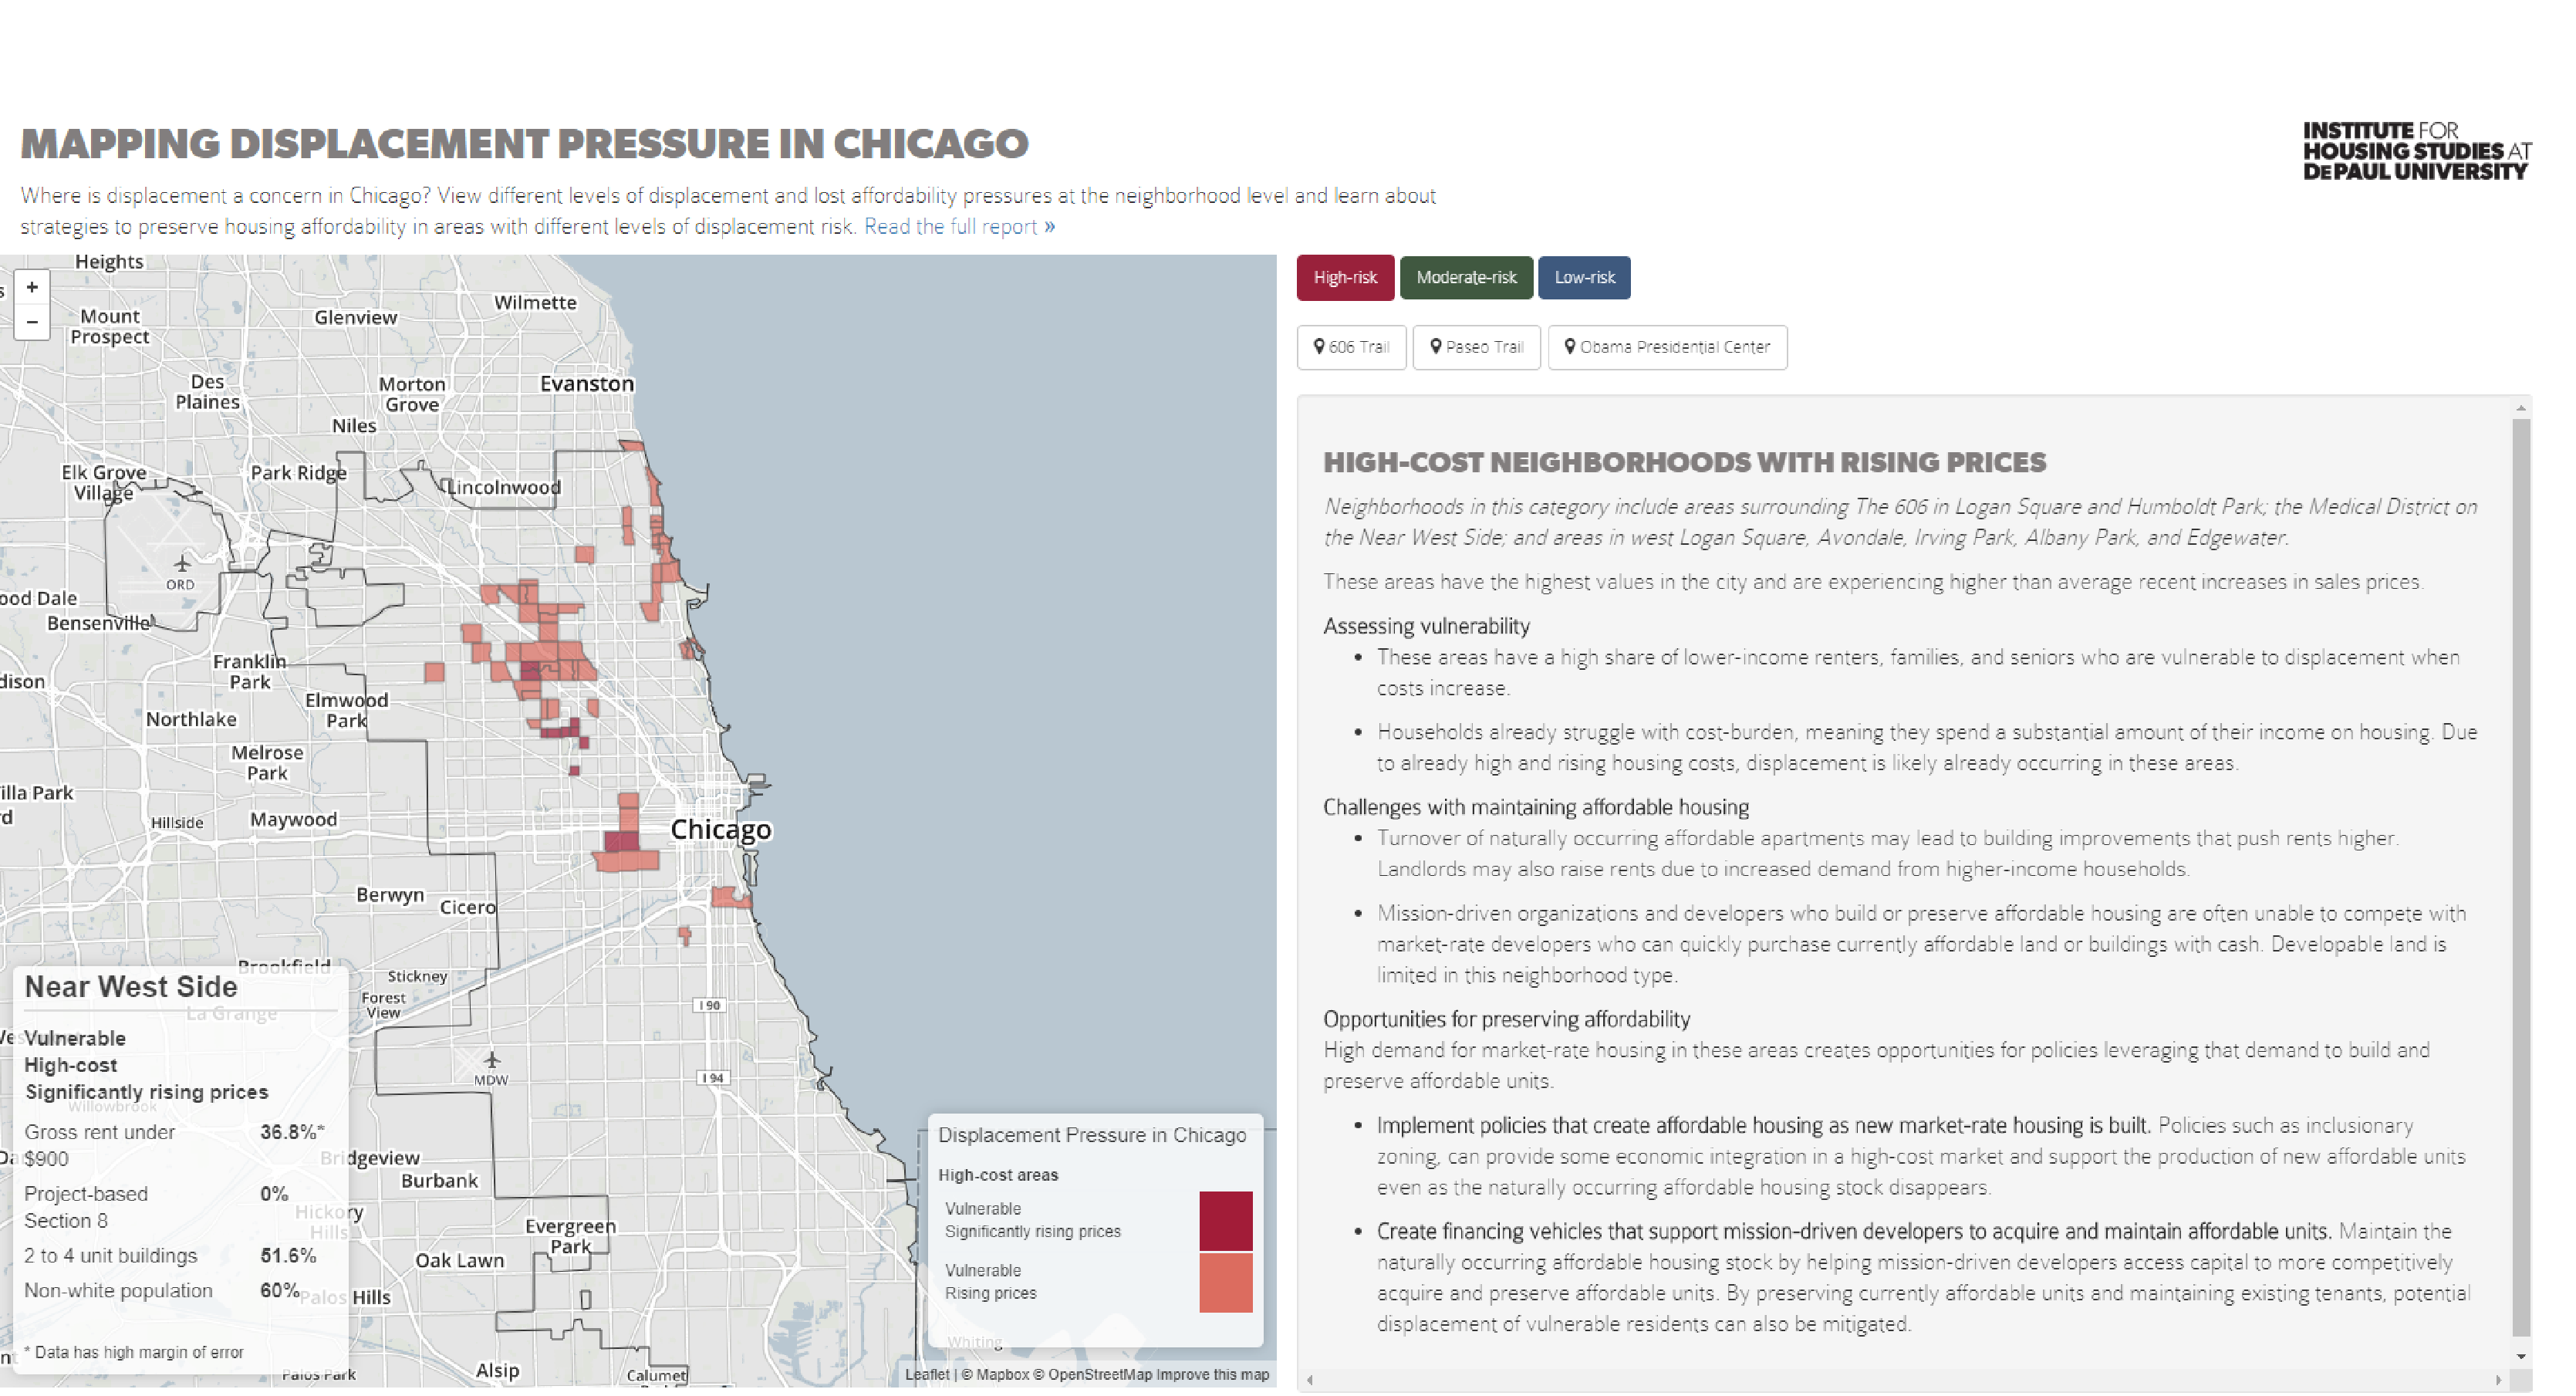 Mapping Displacement Pressure in Chicago, 2018